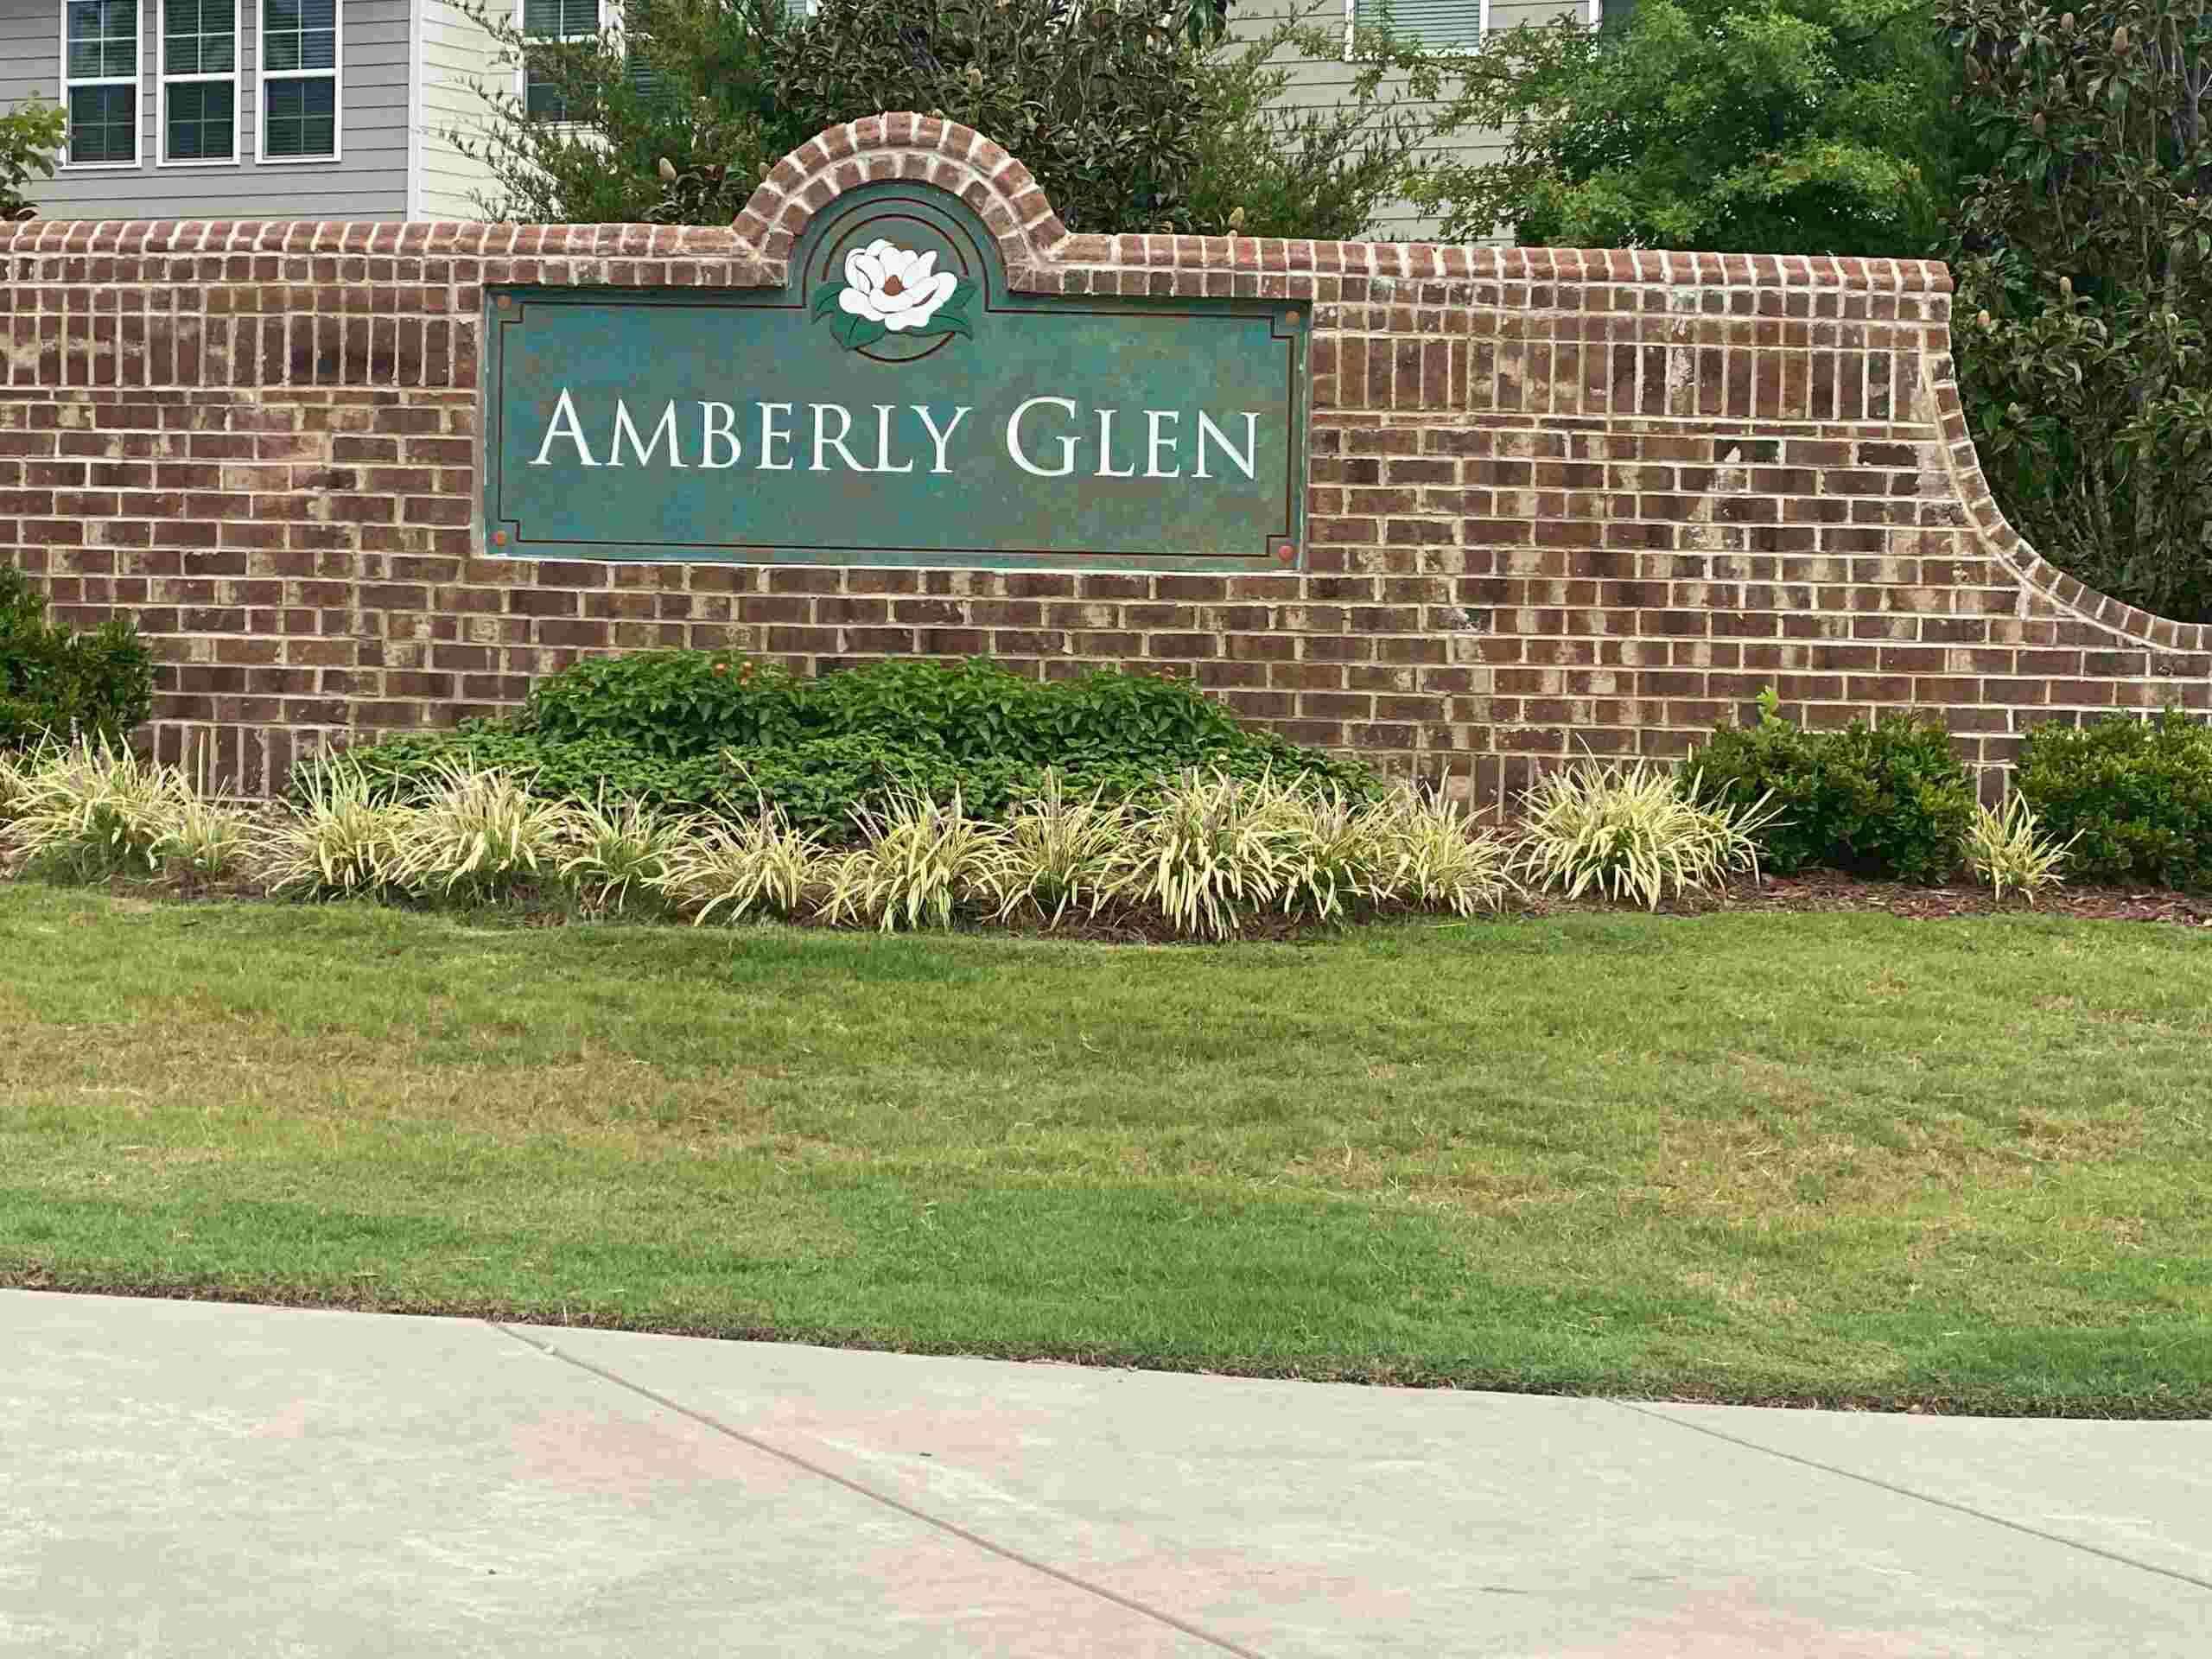 Amberly Glen Property Name On a Wall